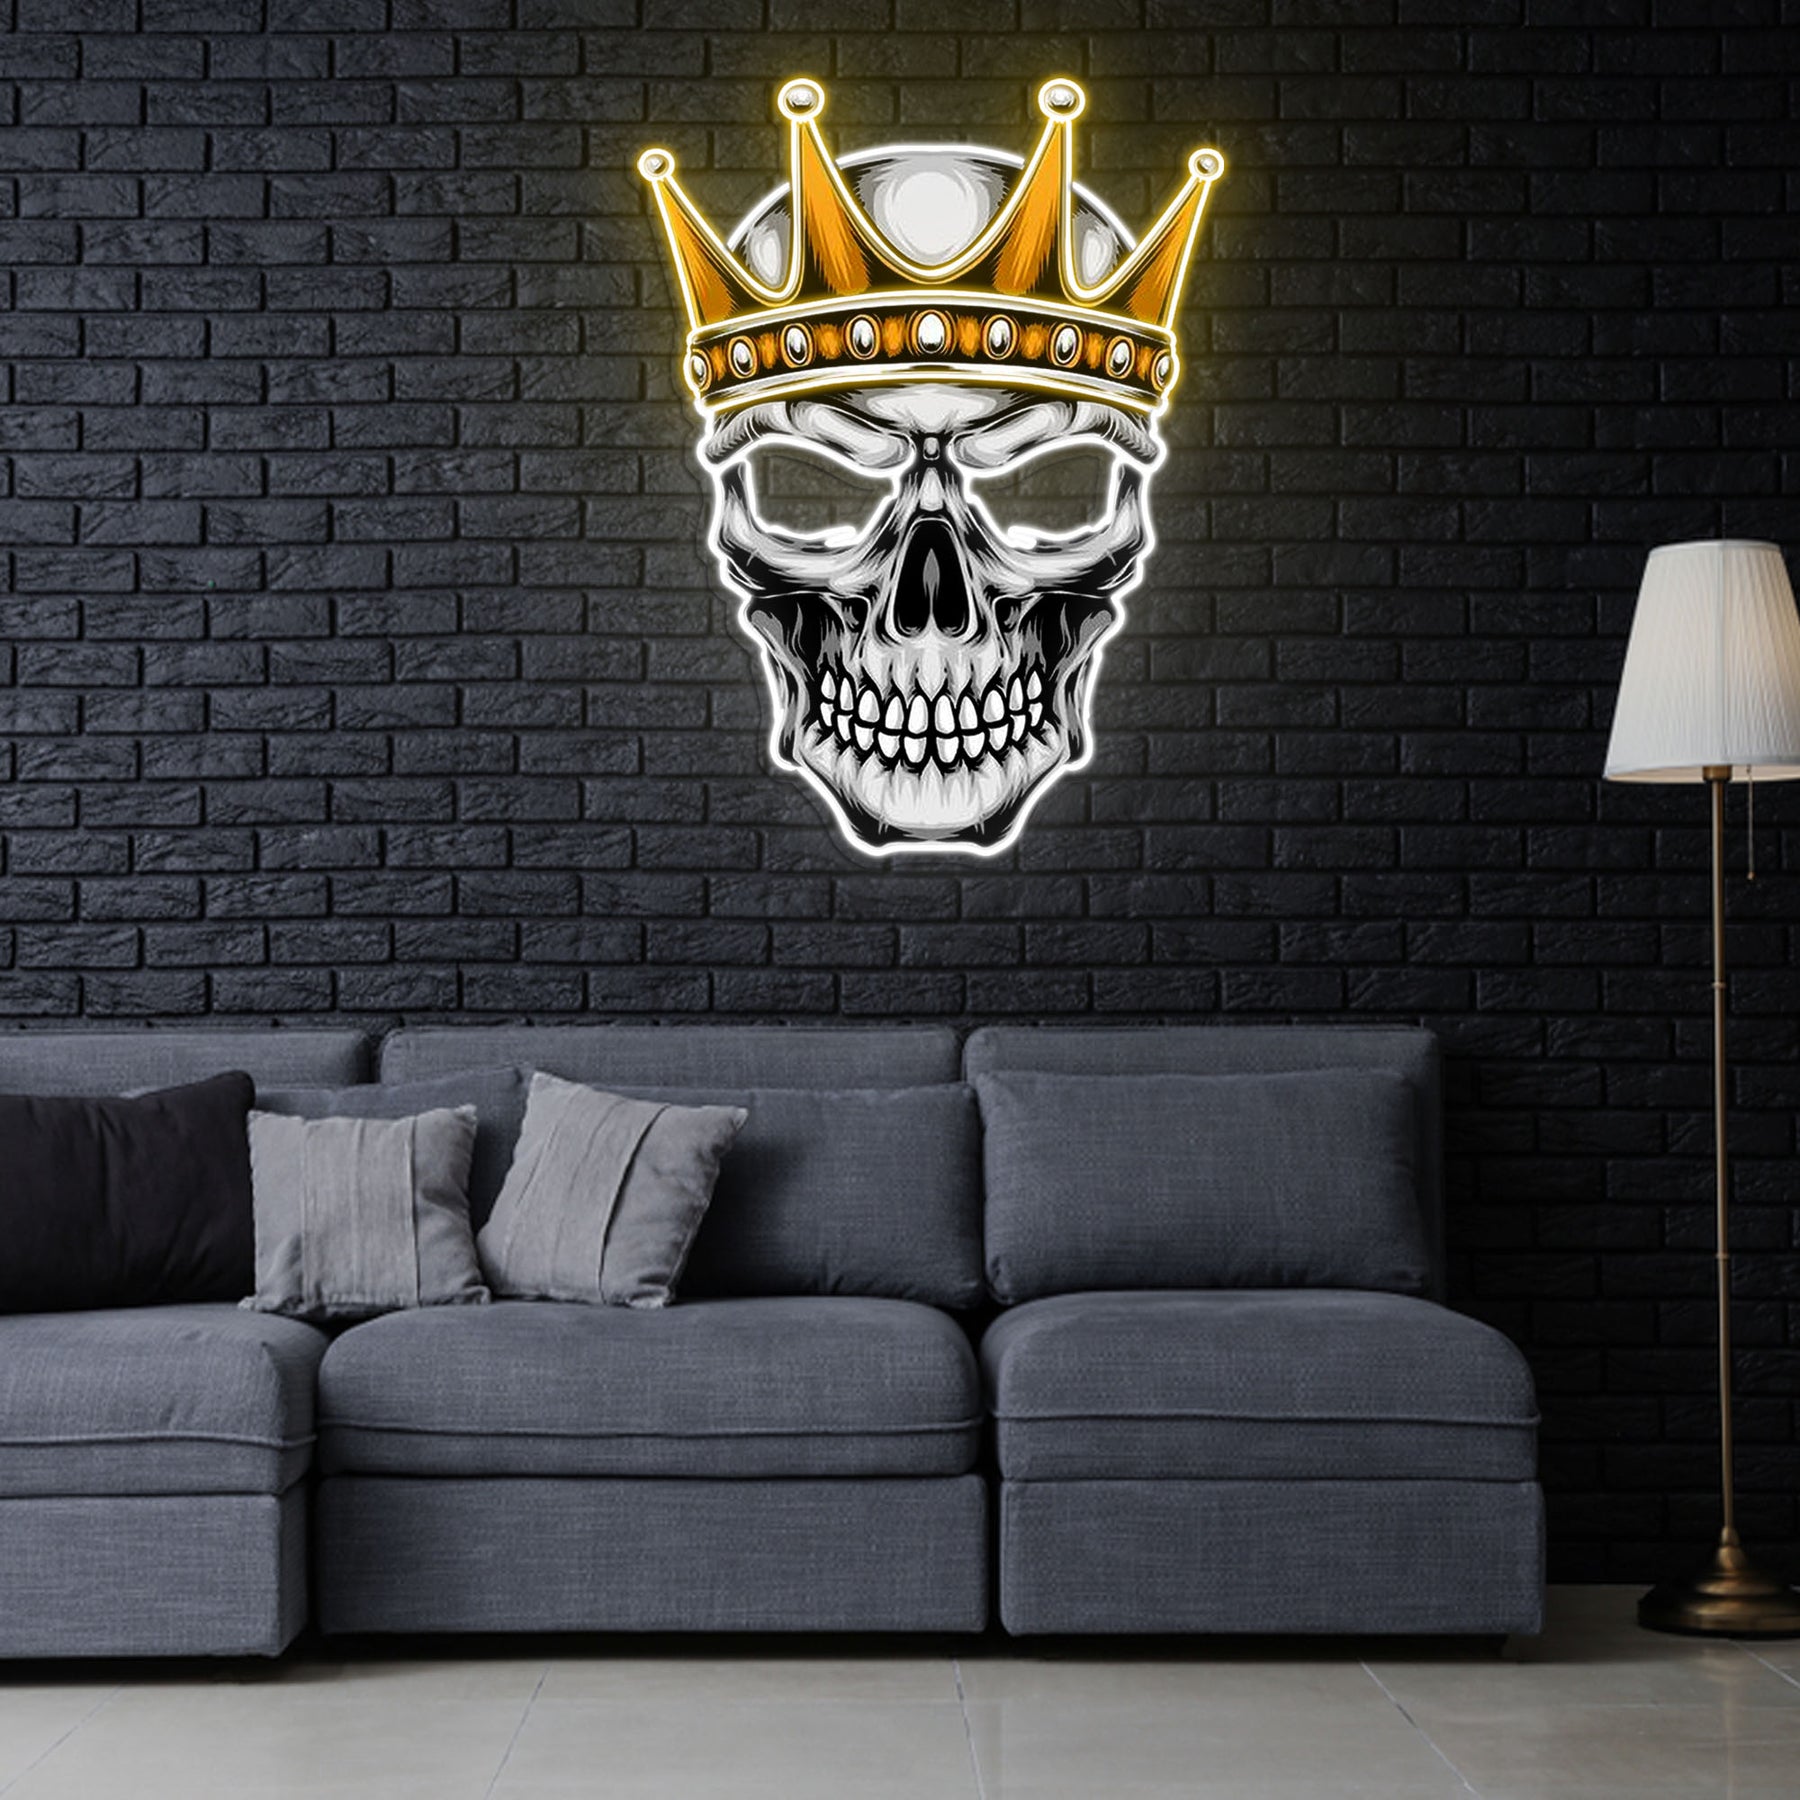 Skull With Crown Led Neon Light